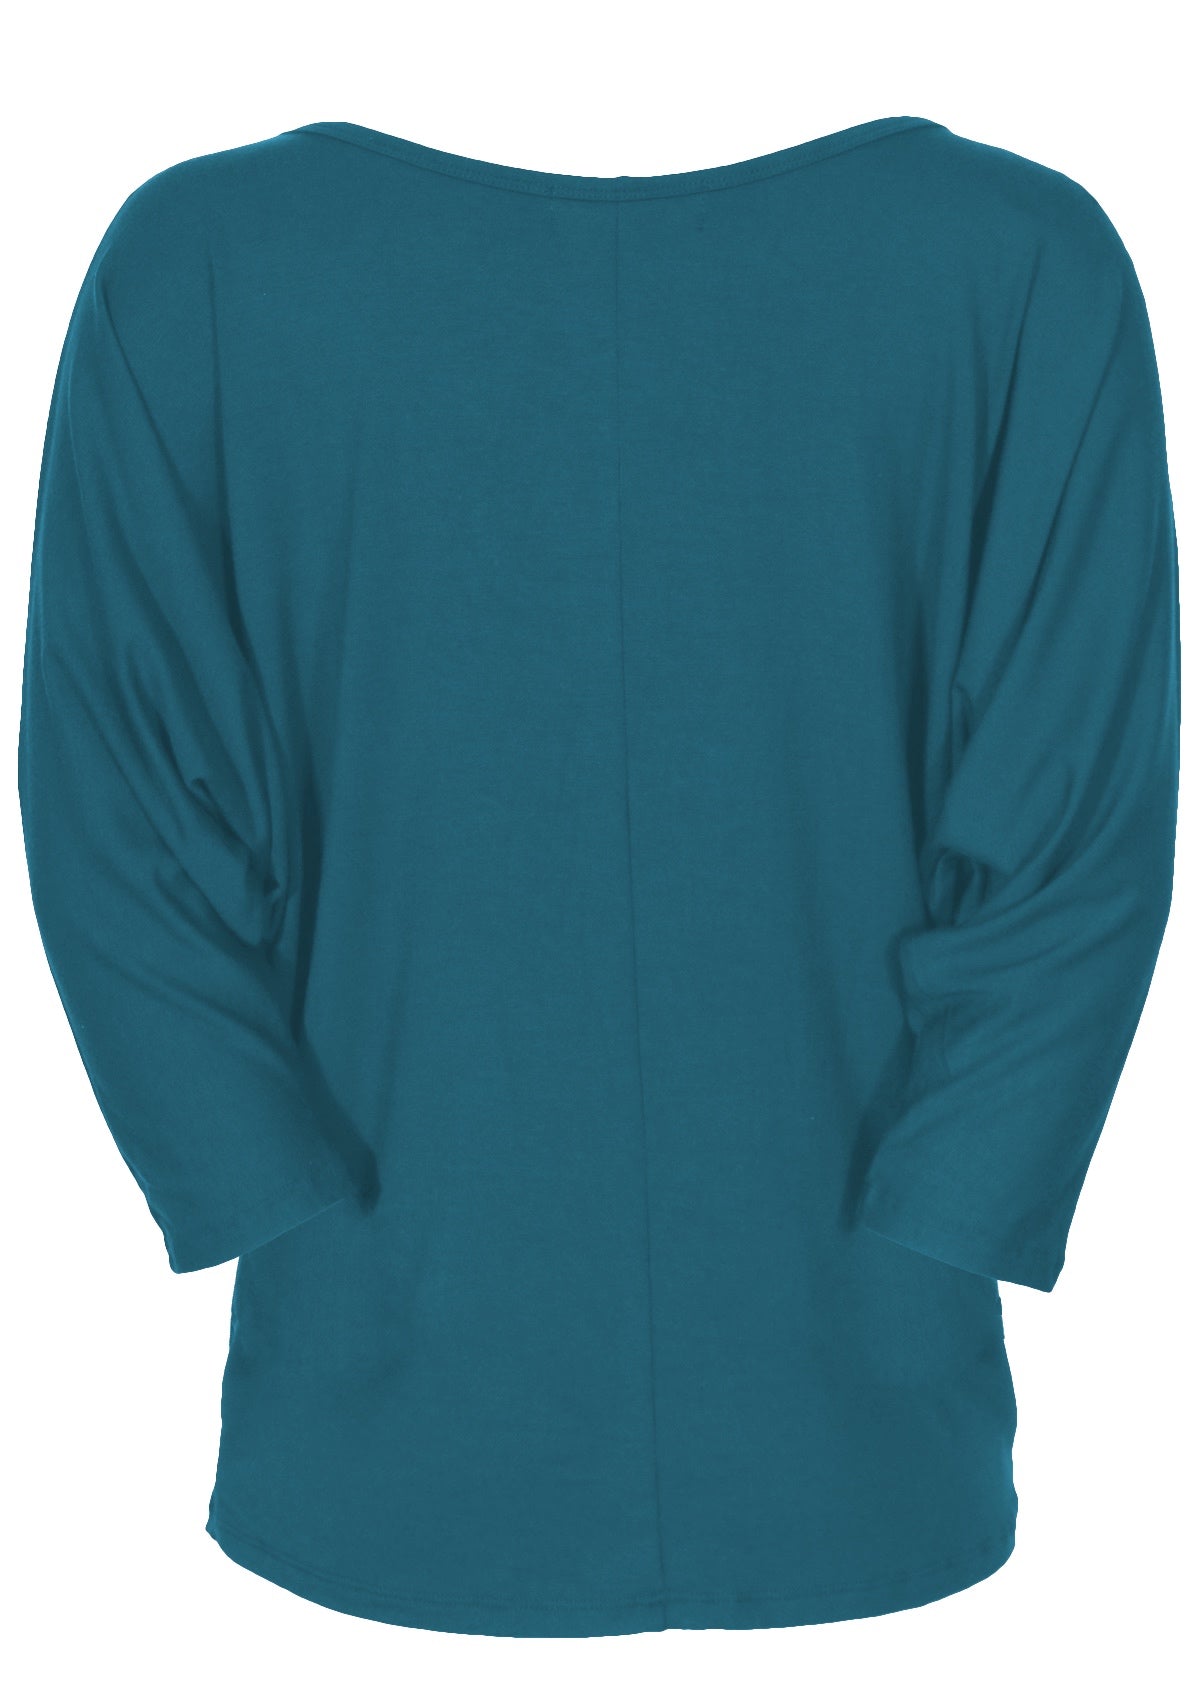 Back view of women's 3/4 sleeve rayon batwing round neckline teal top.